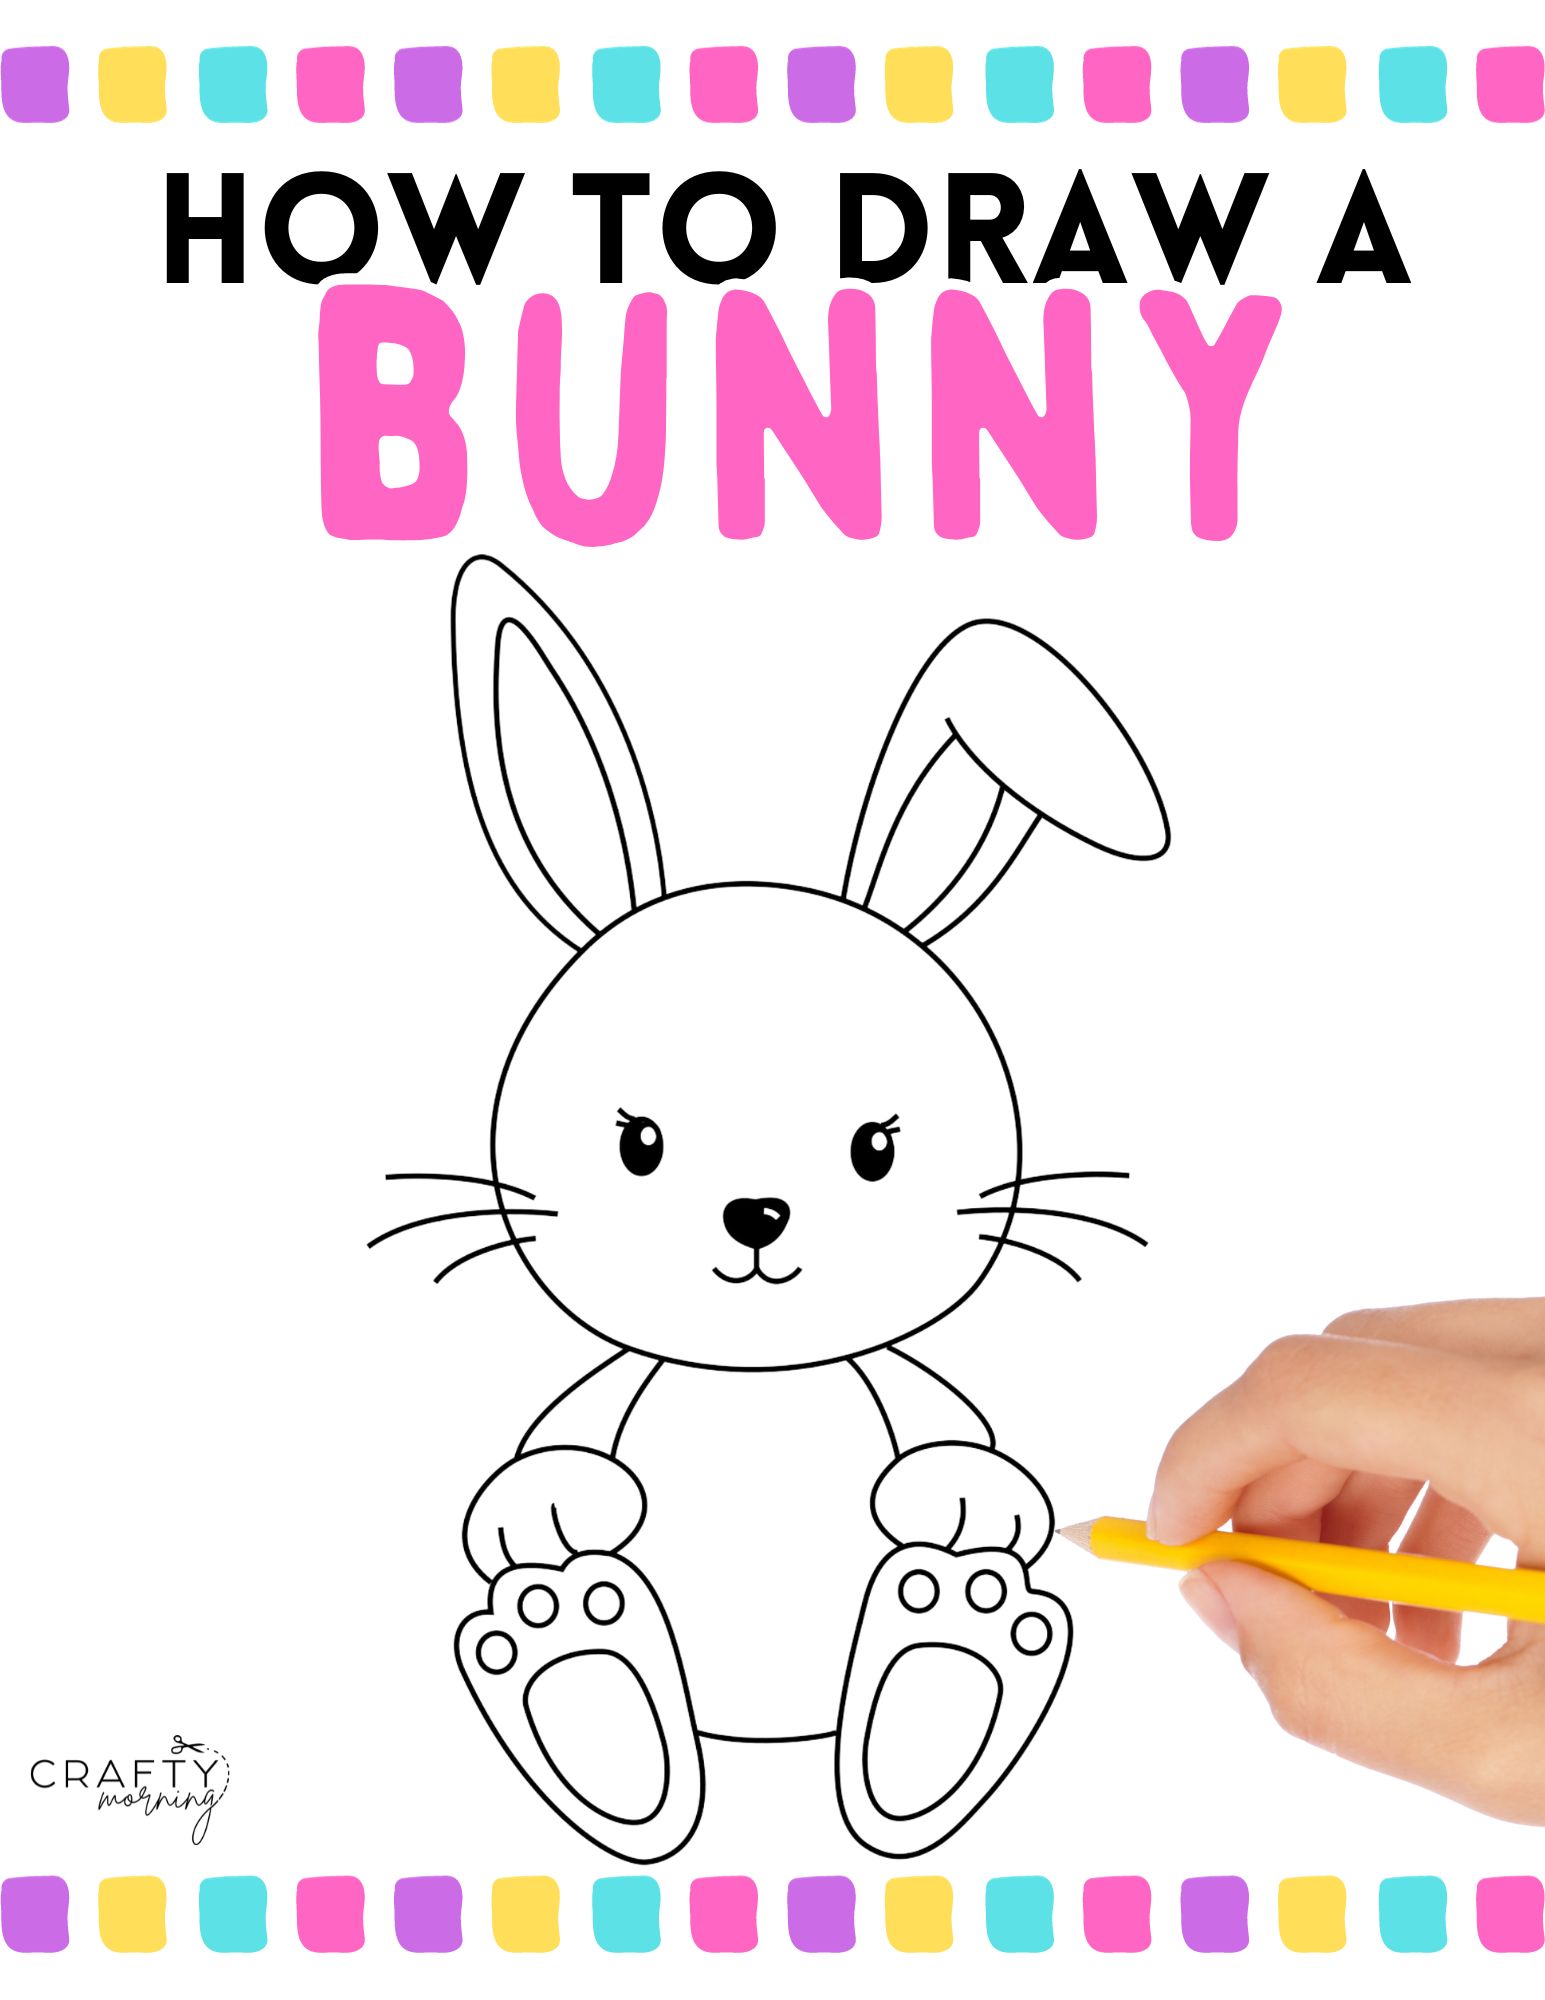 How To Draw A Bunny For Kids, Step by Step, Drawing Guide, by Dawn -  DragoArt